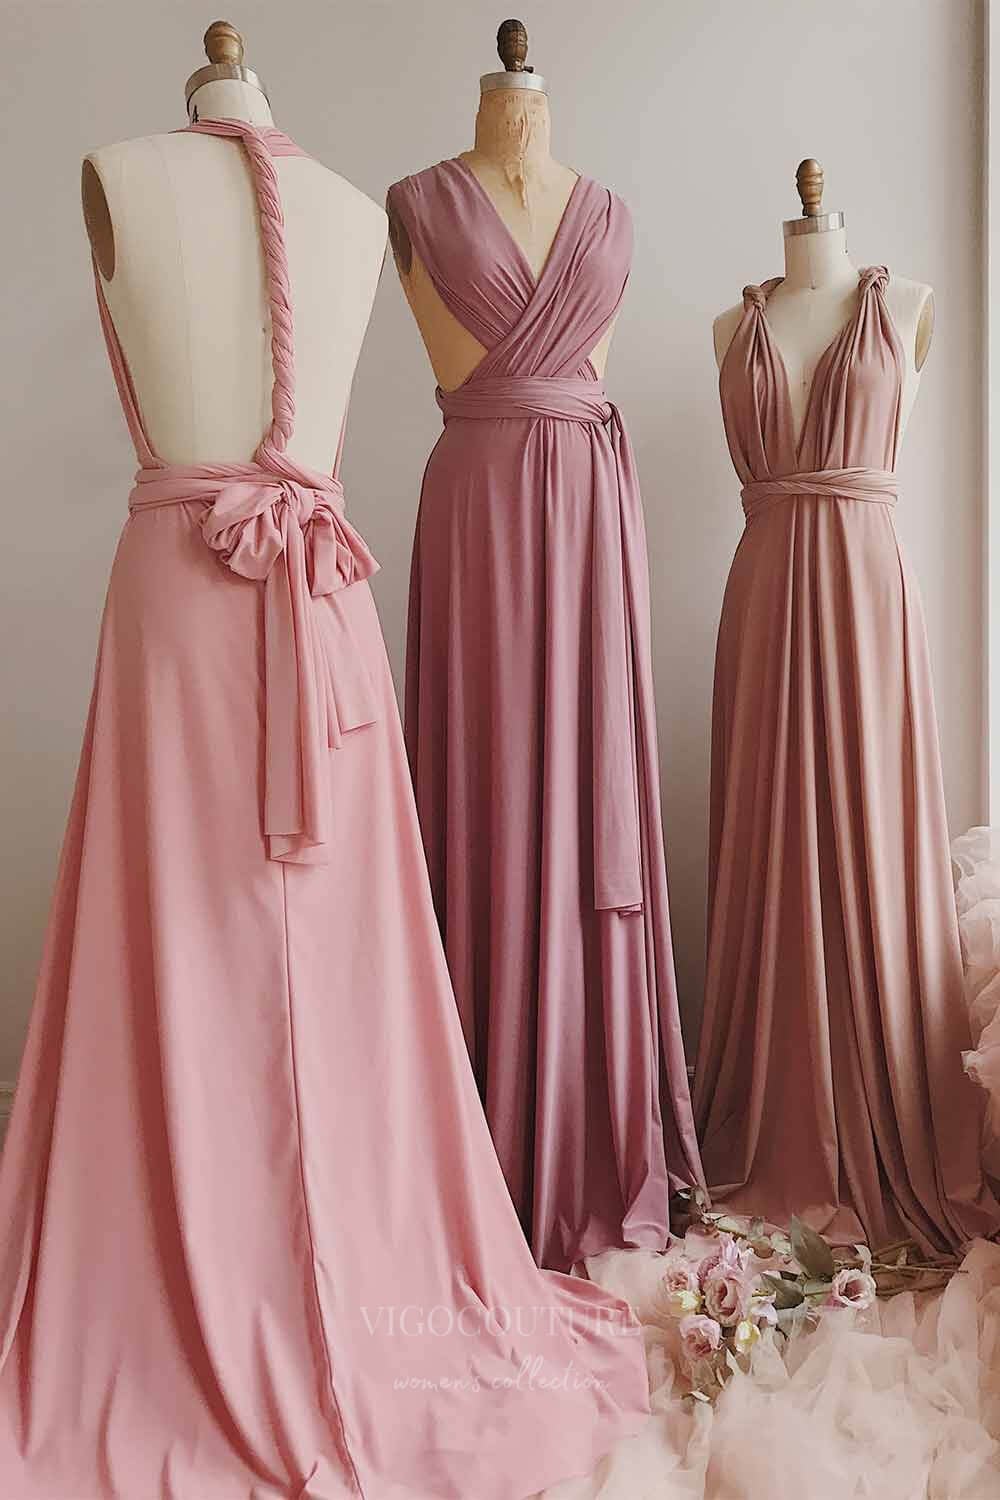 vigocouture-Convertible Bridesmaid Dress Stretchable Woven Dress Pleated Prom Dress Multiway Dress 20860-Fushia-Prom Dresses-vigocouture-Custom Colors-US2-